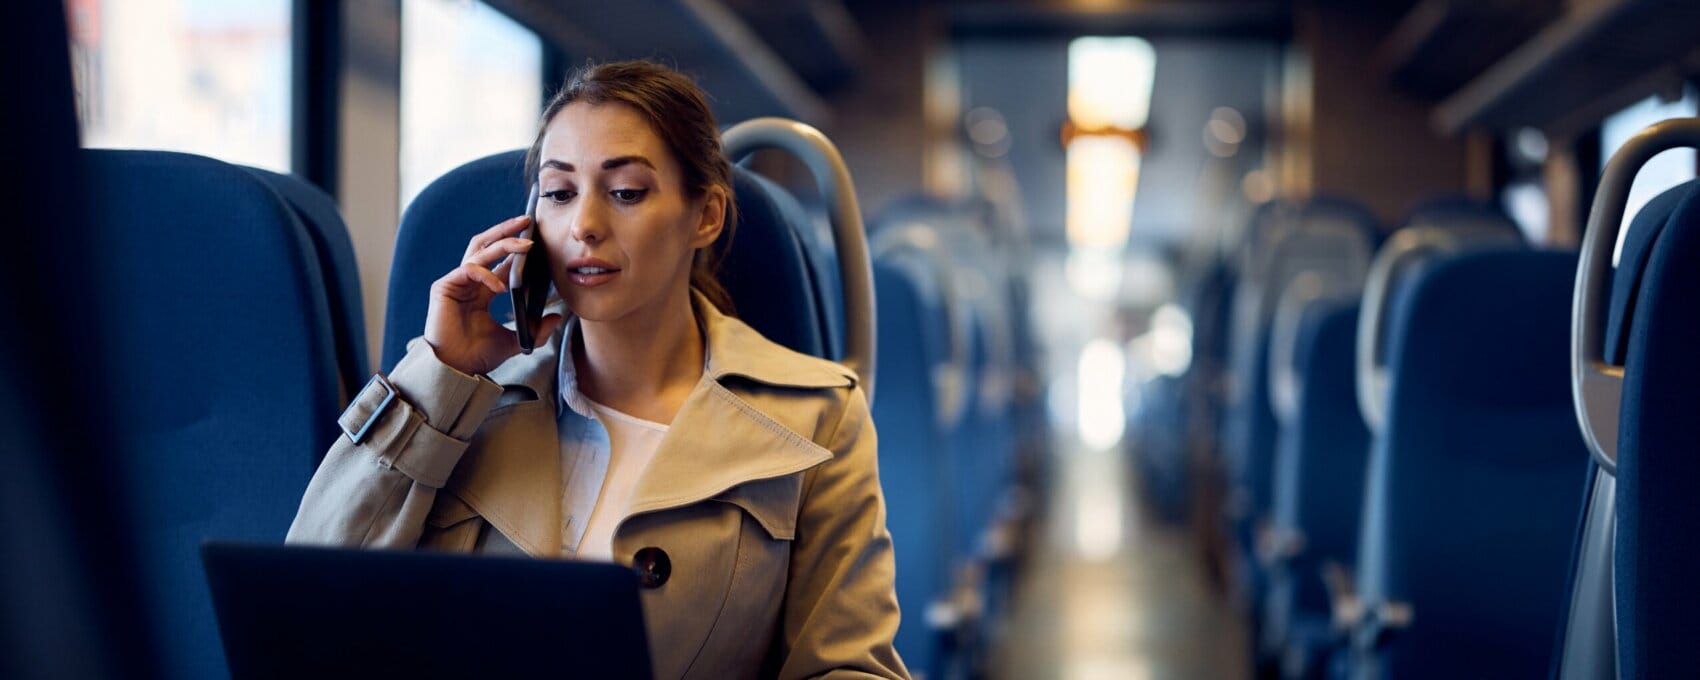 Office worker on train whilst speaking on mobile and looking at laptop